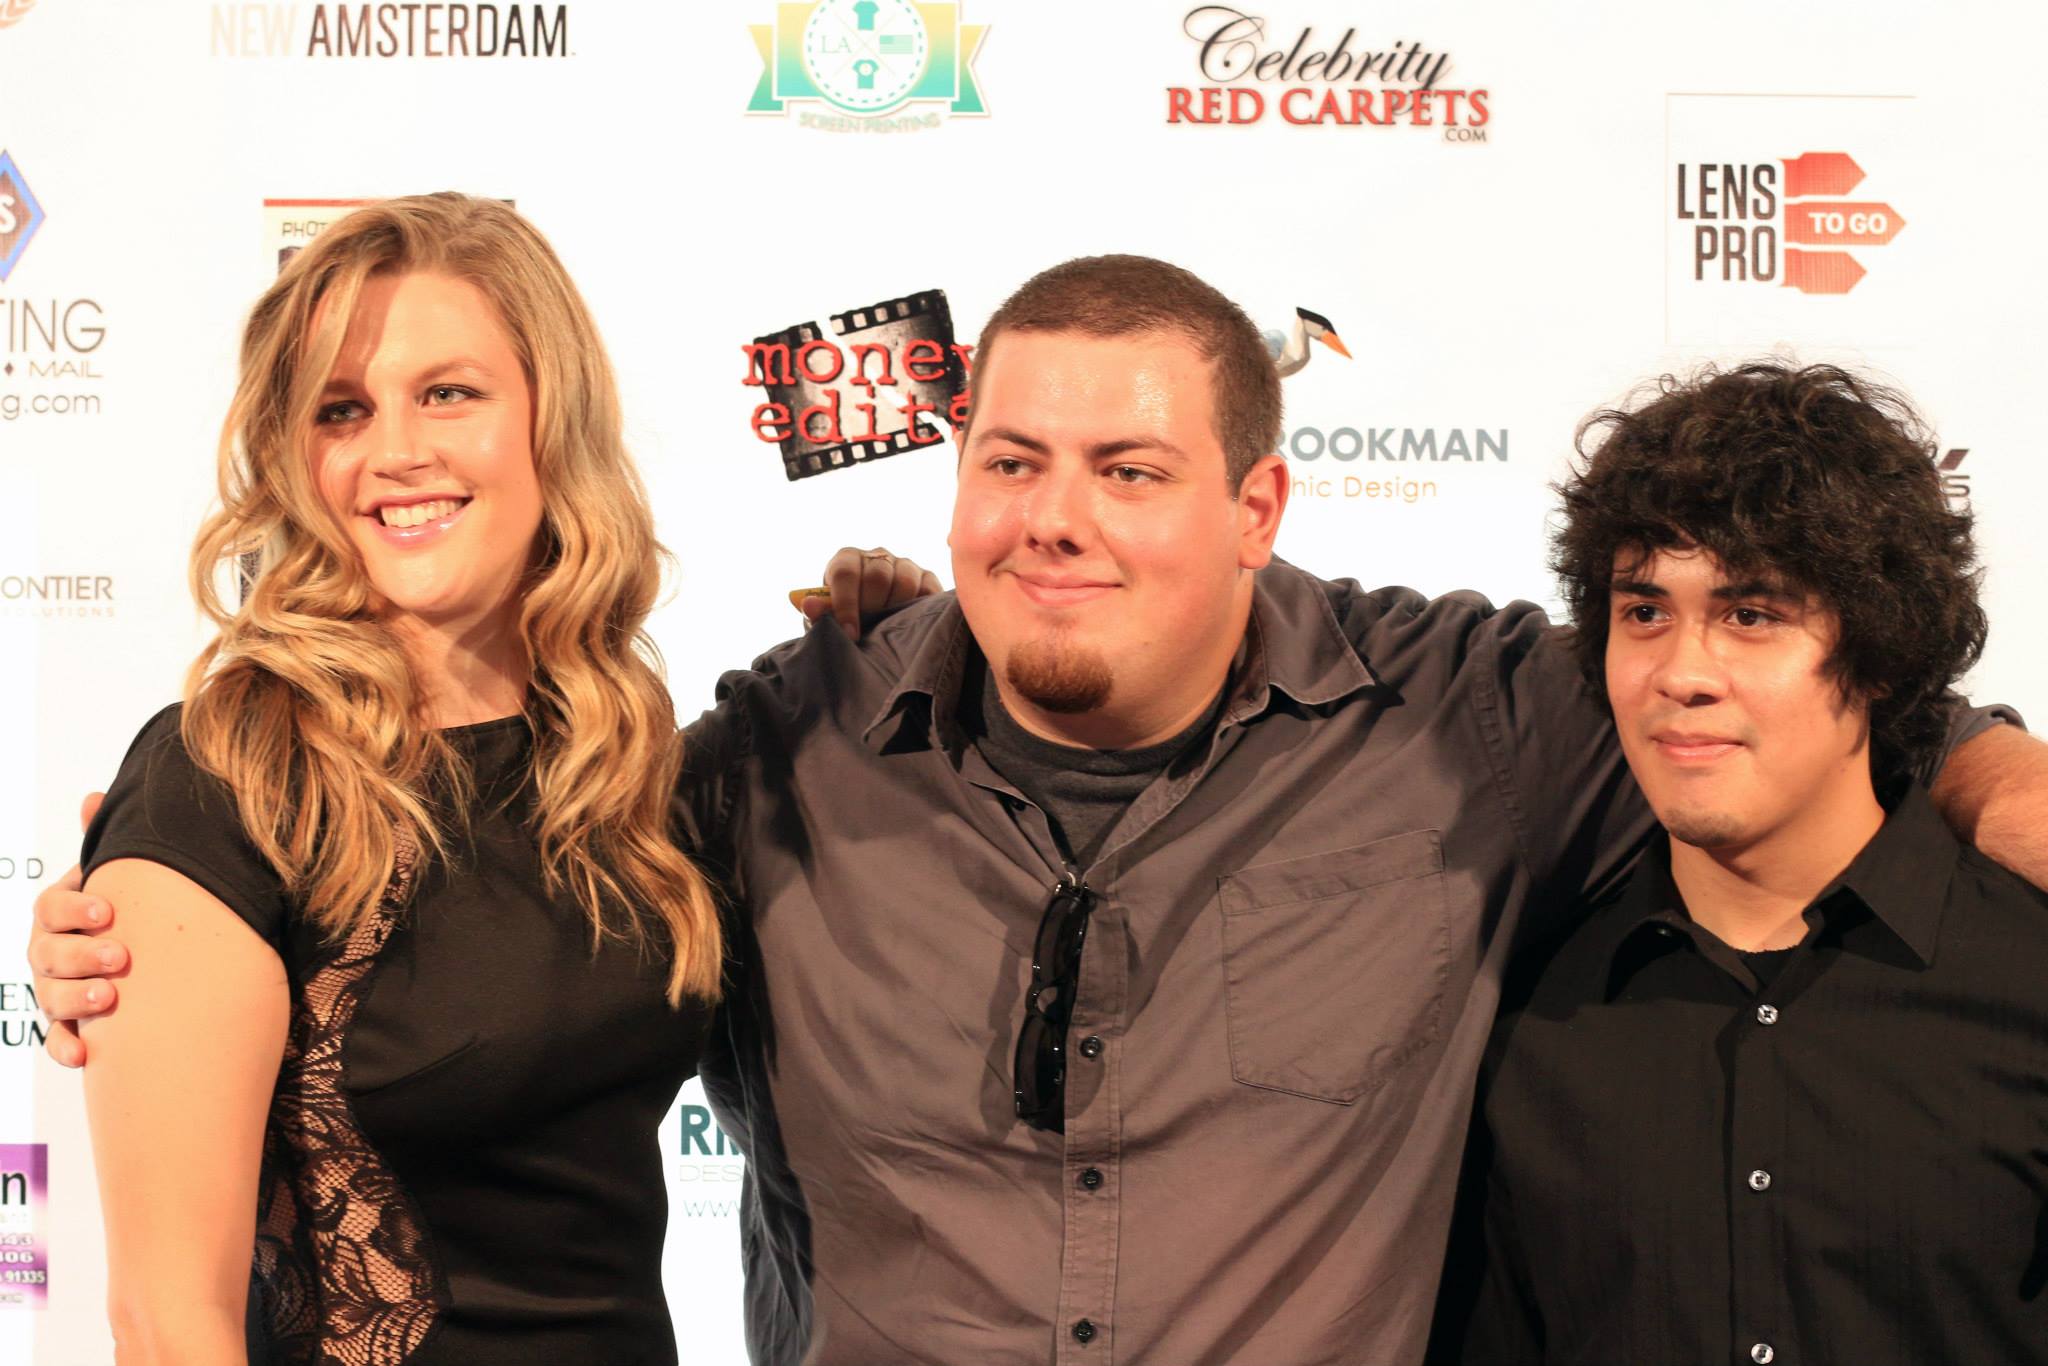 Andrew posing on the red carpet with actress Kati Zaylor and composer Nestor Estrada at the 2014 Los Angeles 48 Hour Film Project's 